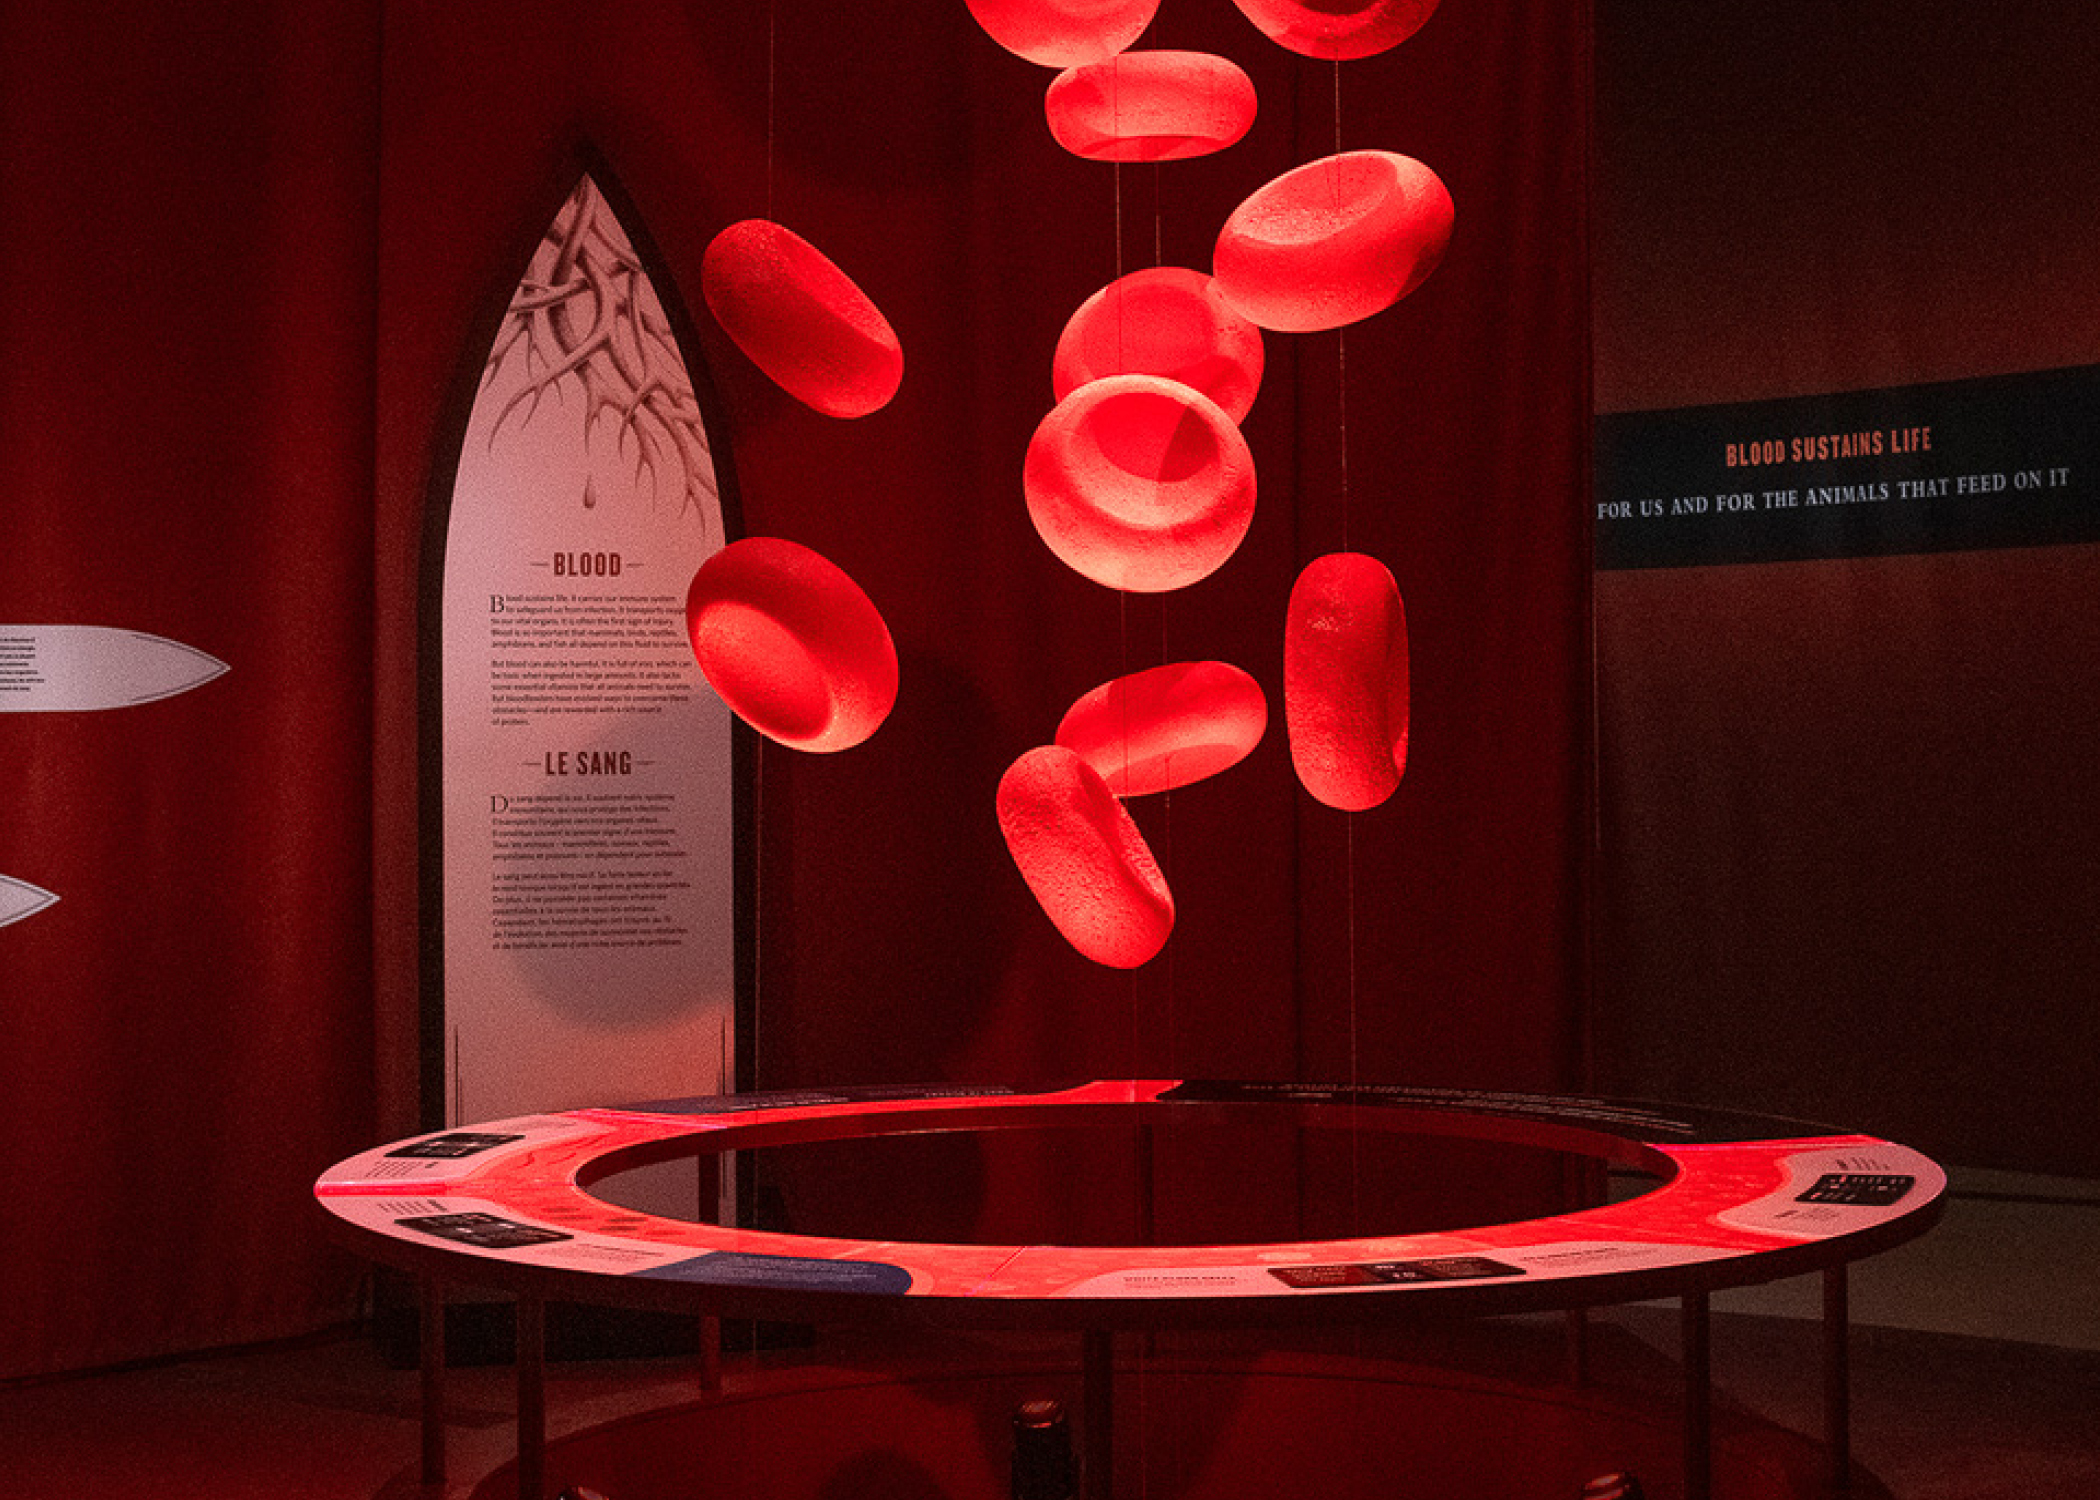 Model of red blood cells suspended in a museum exhibition.